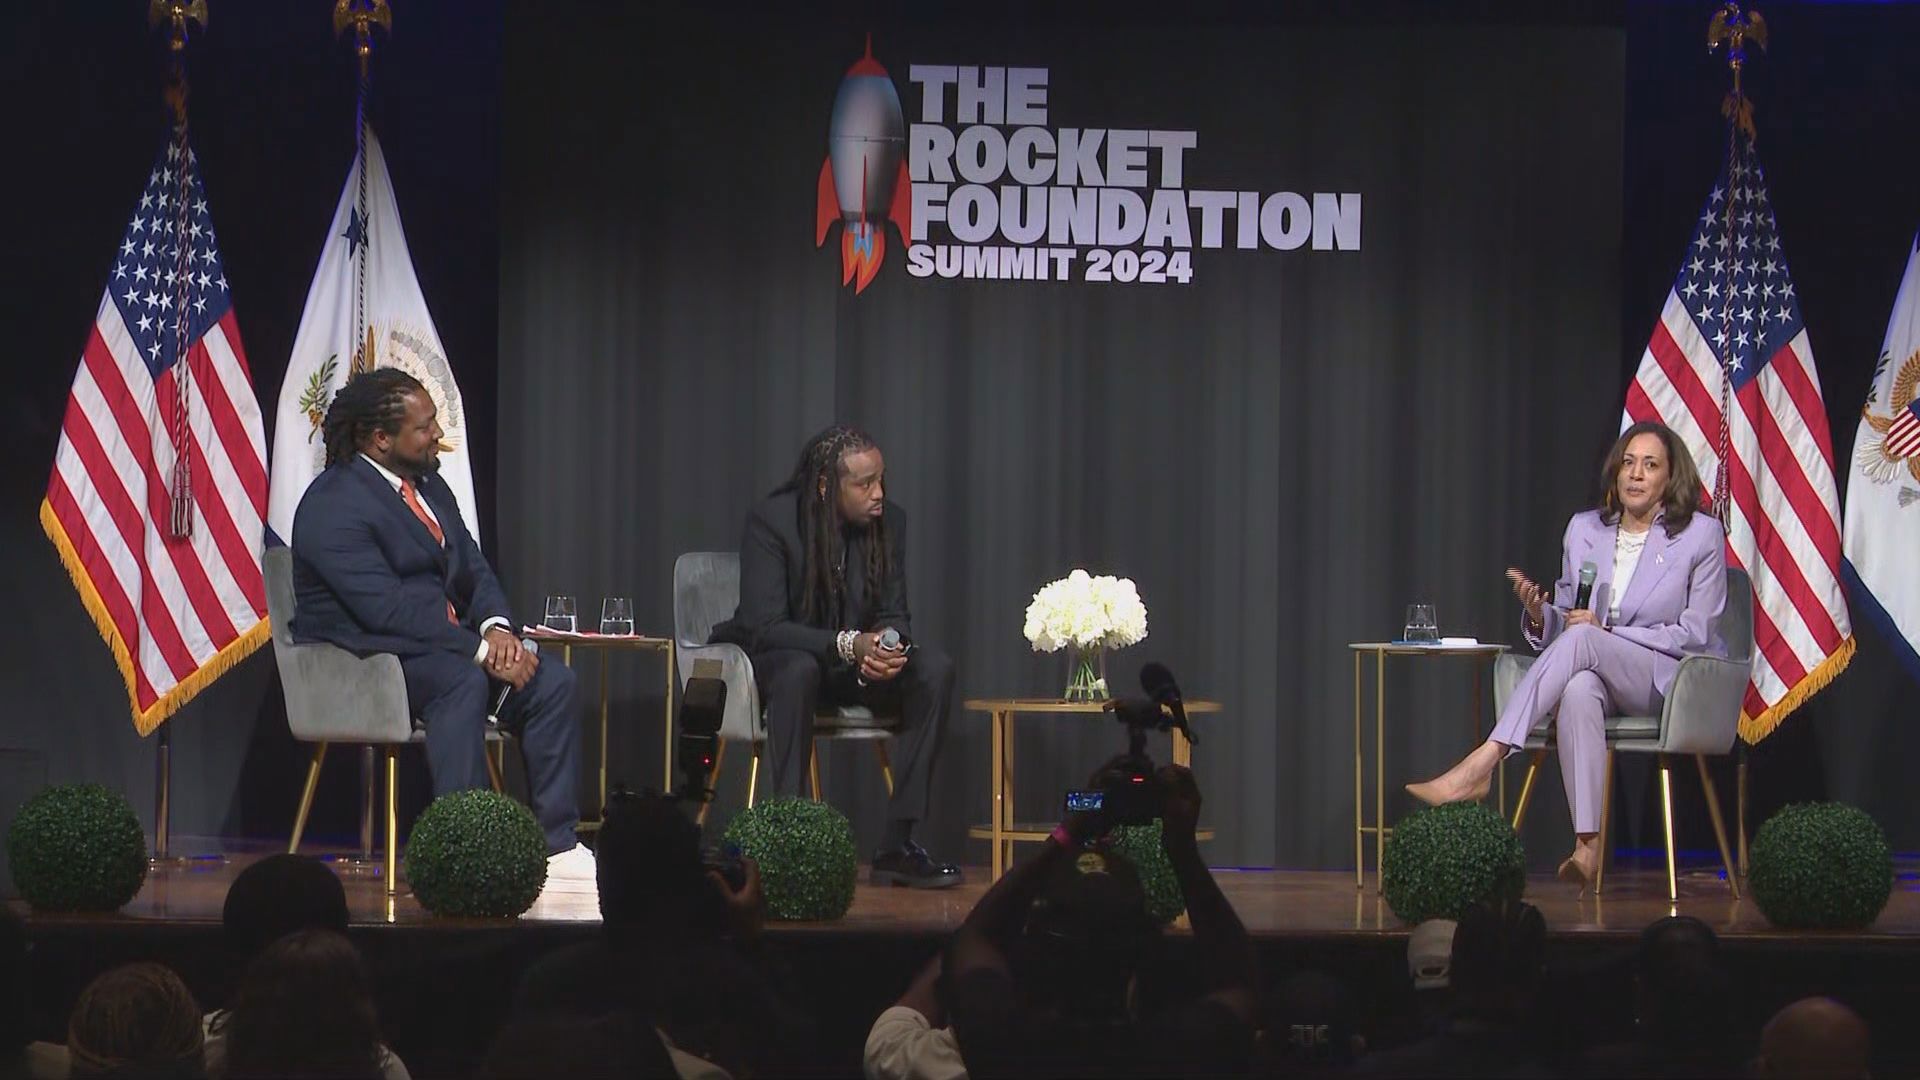 Quavo and VP Kamala Harris spoke on gun prevention violence at the Rocket Foundation Summit, moderated by Greg Jackson of the Office for Gun Violence Prevention.